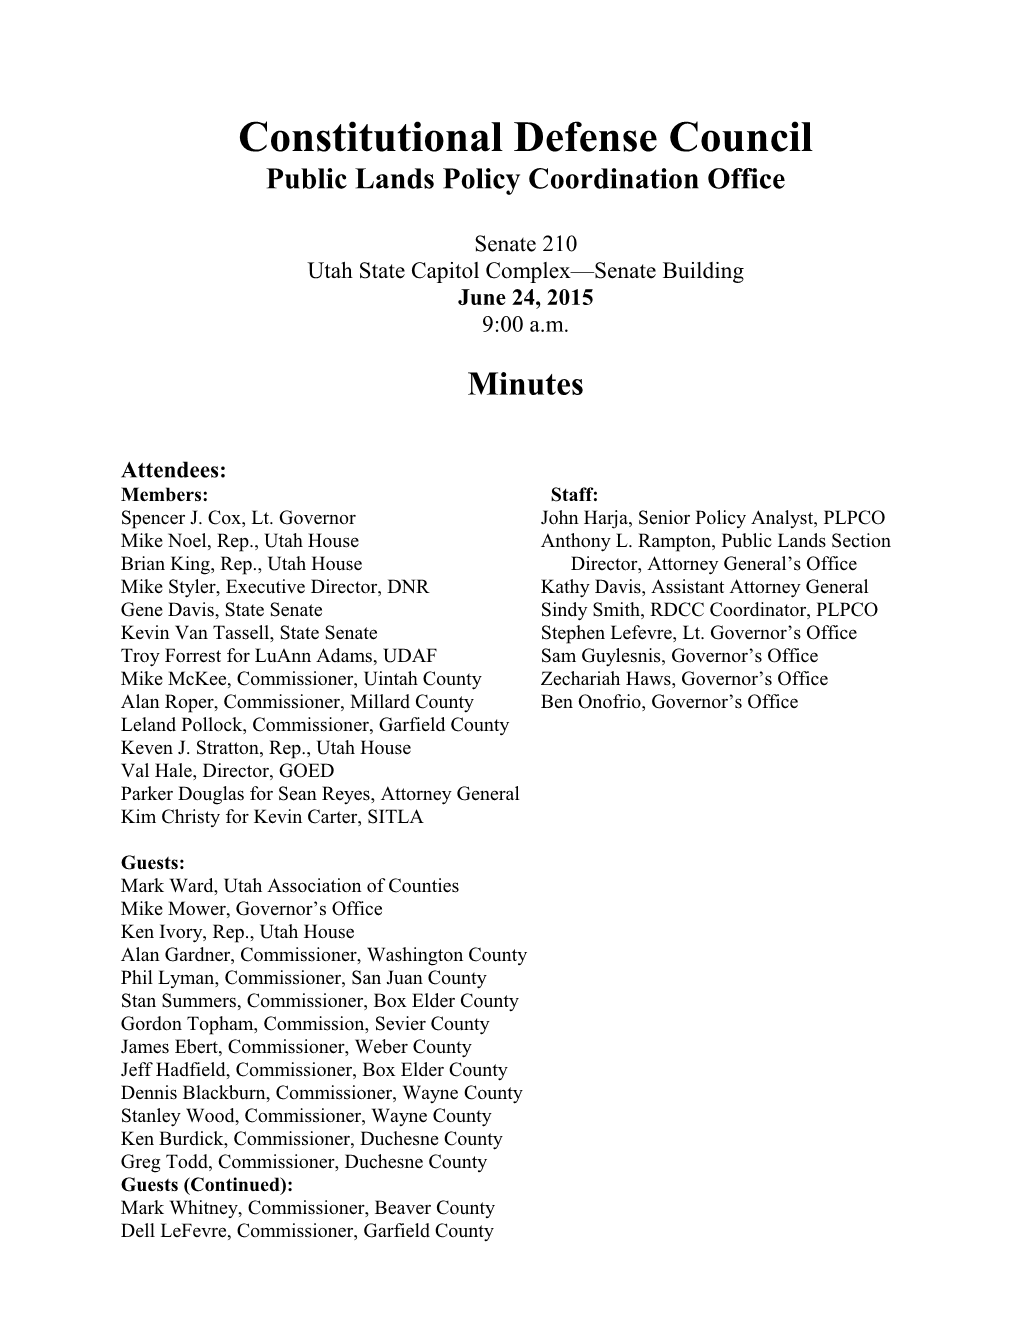 Public Lands Policy Coordination Office